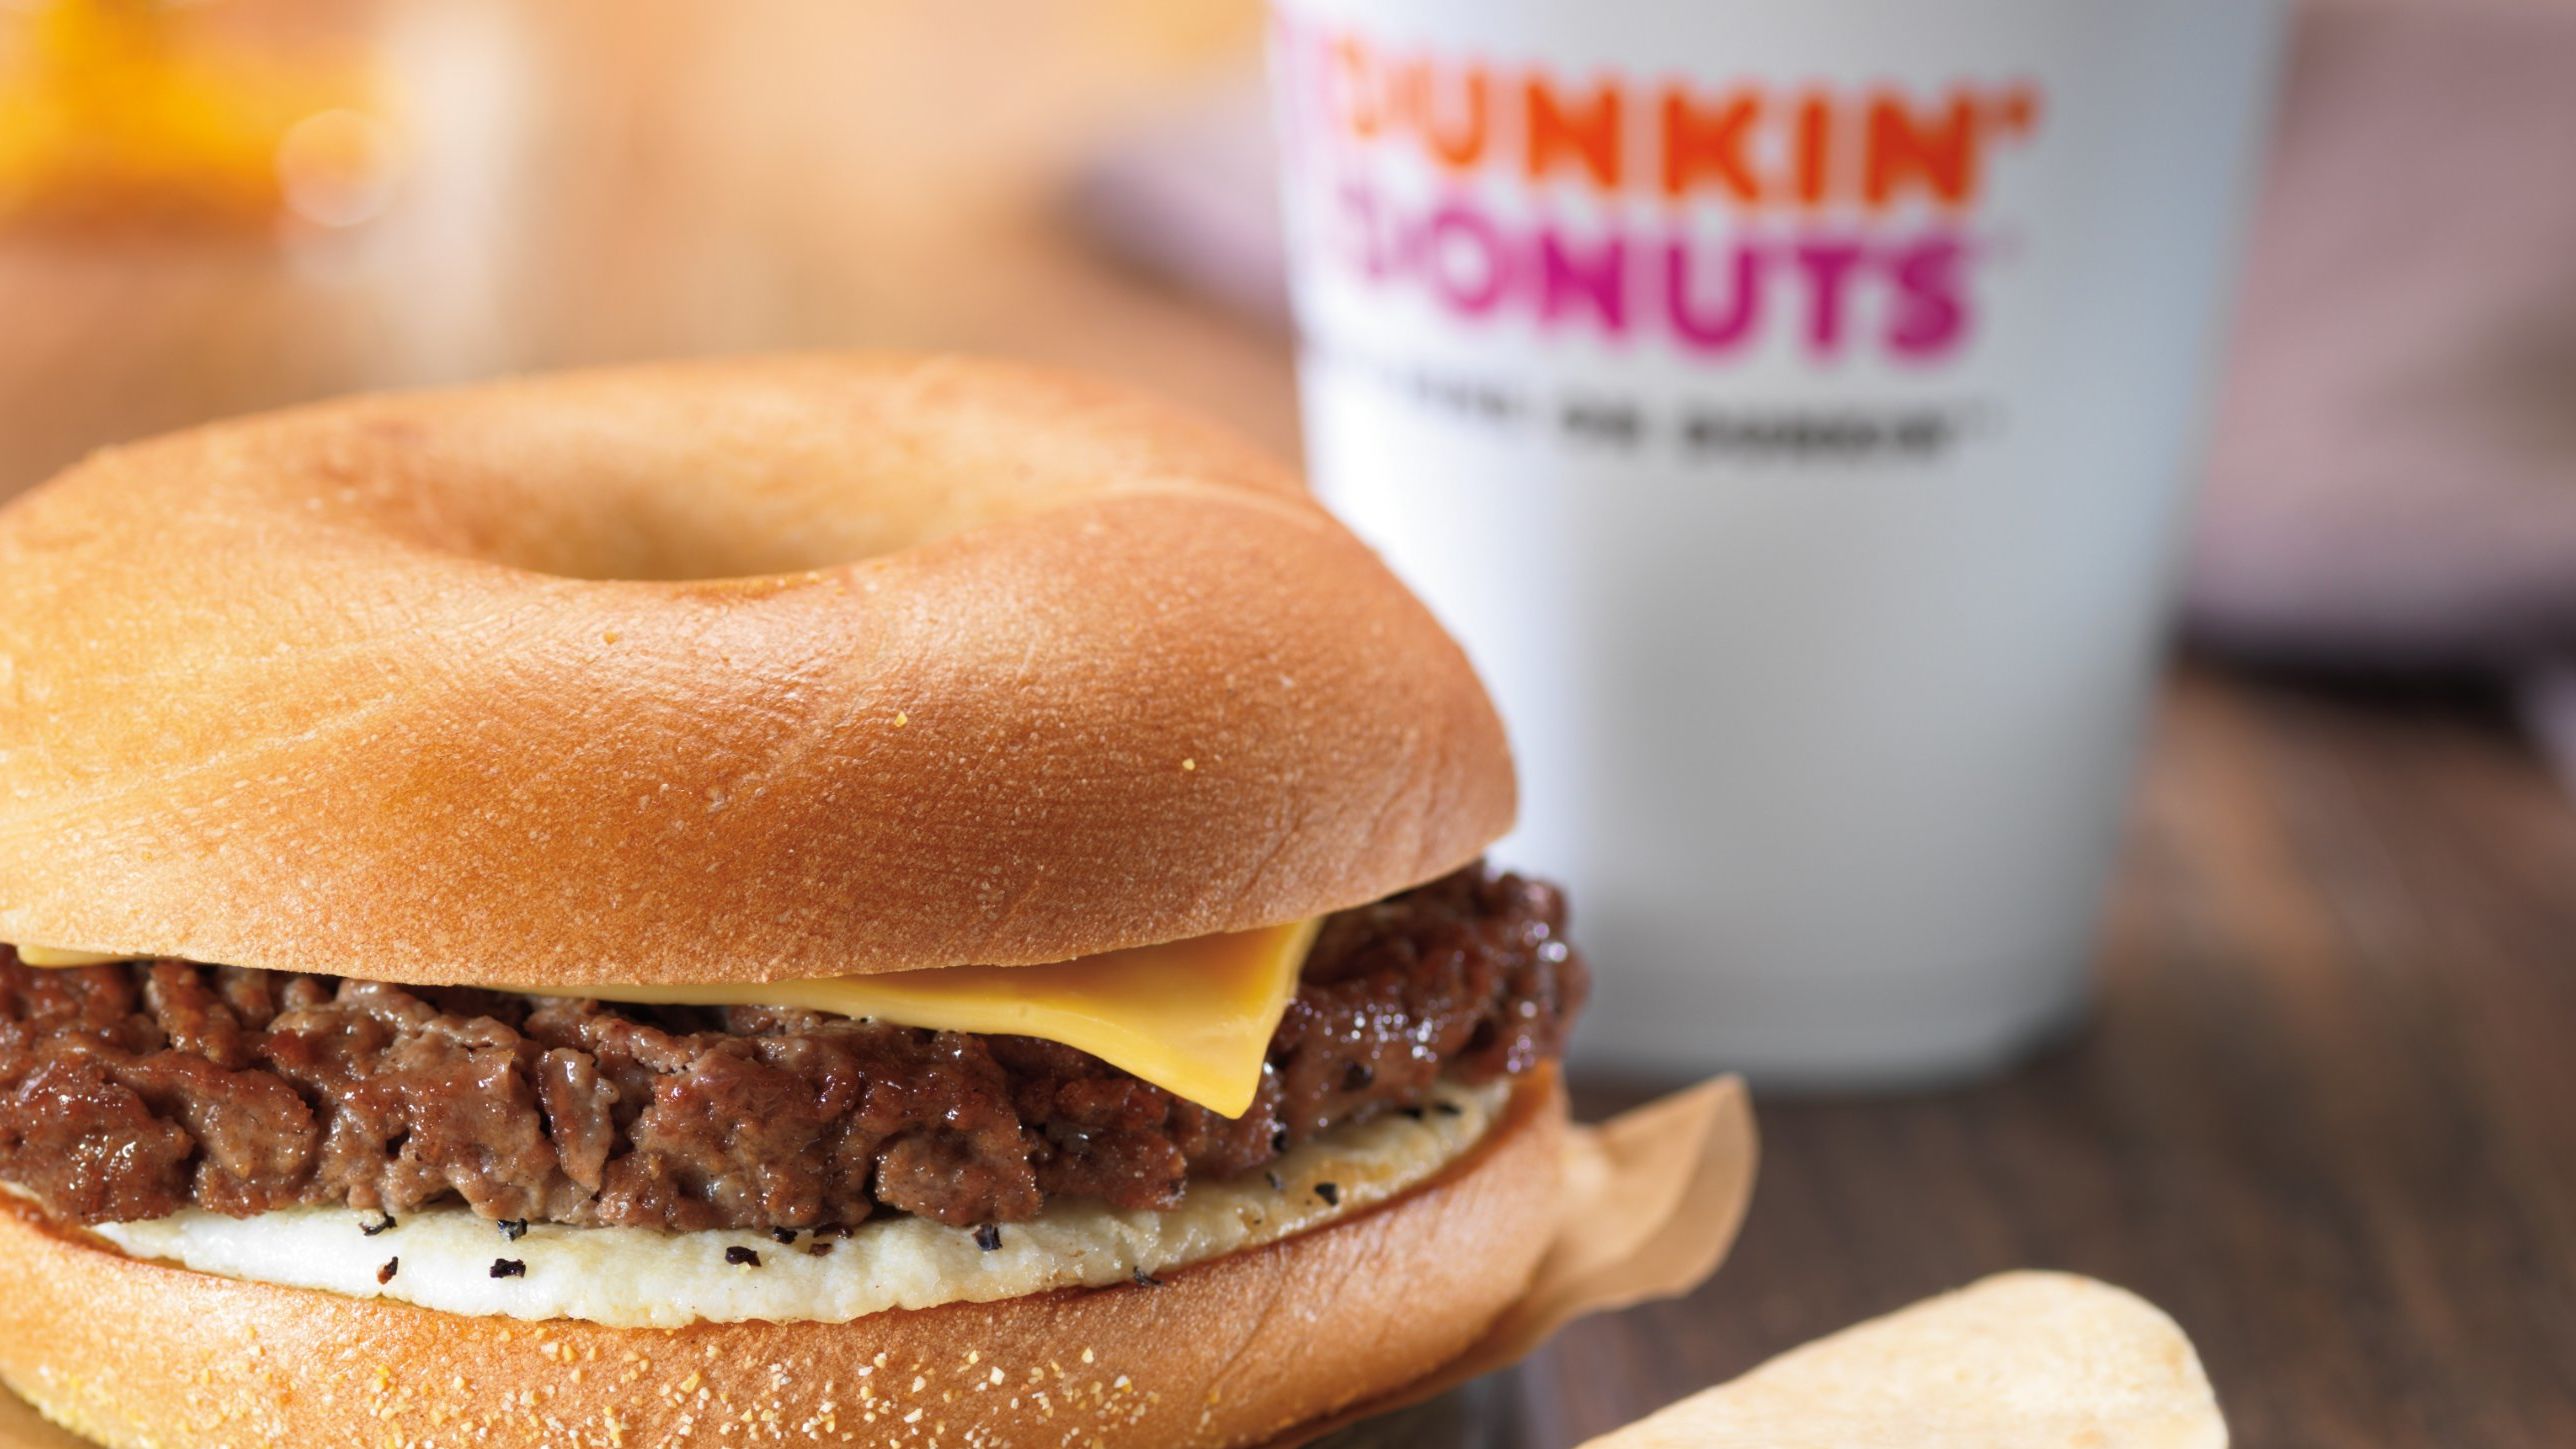 Dunkin' Donuts says its steak-and-egg sandwich contains Angus beef.